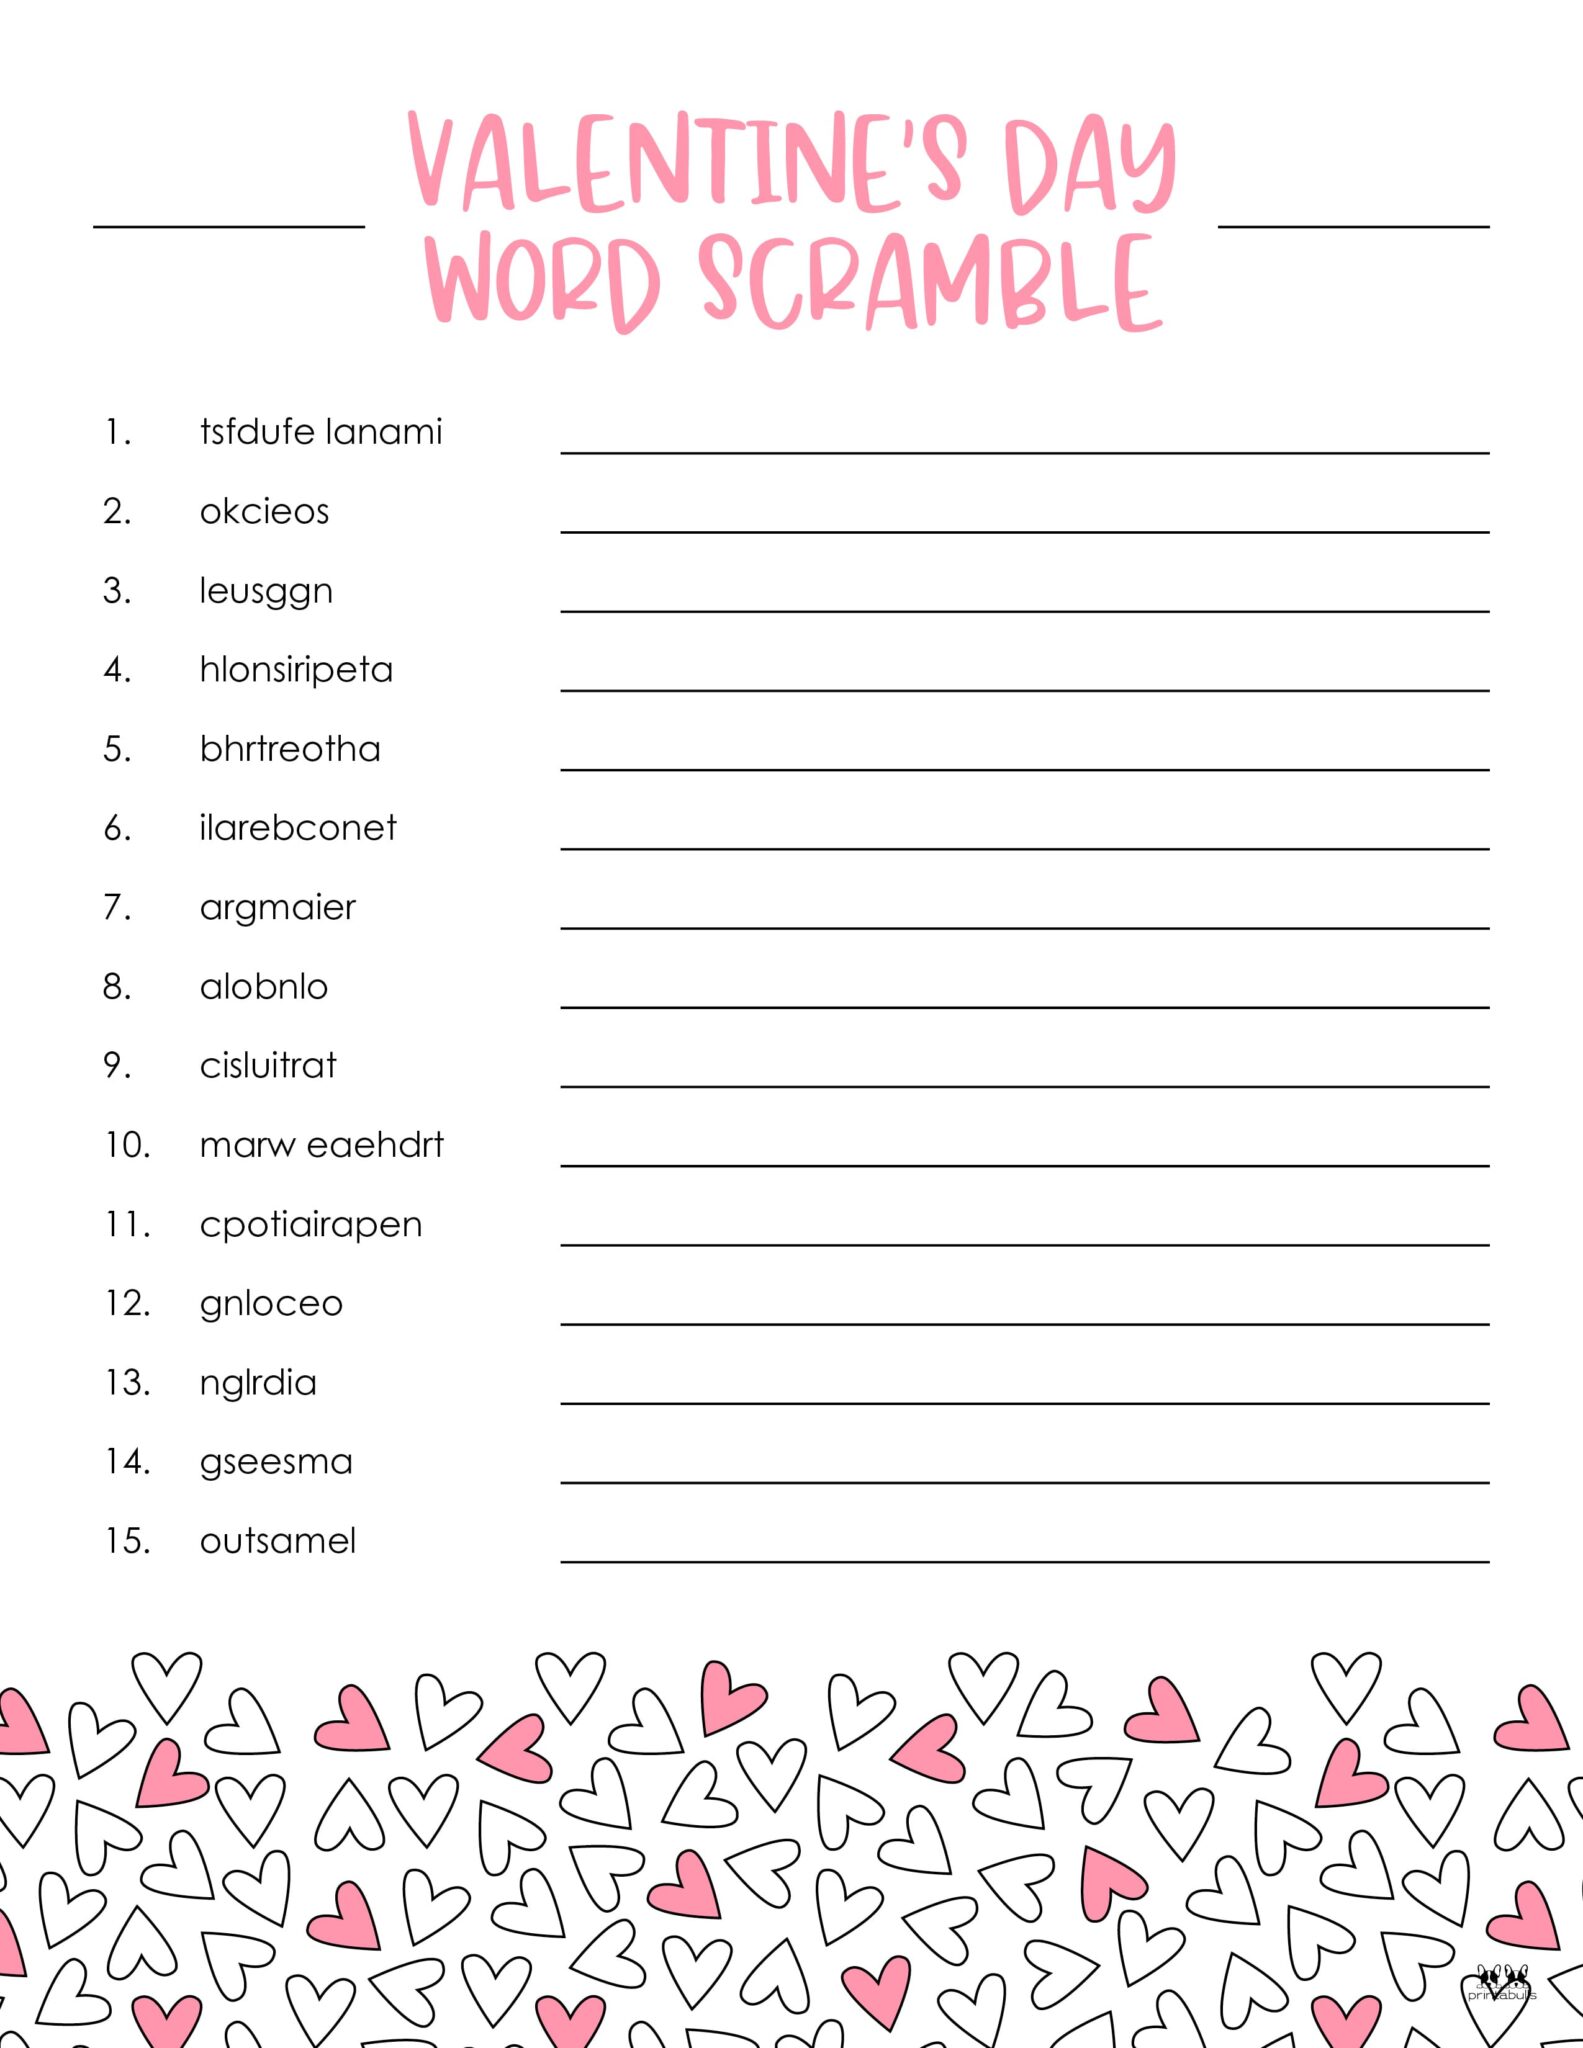 valentine-s-day-word-scrambles-10-free-pages-printabulls